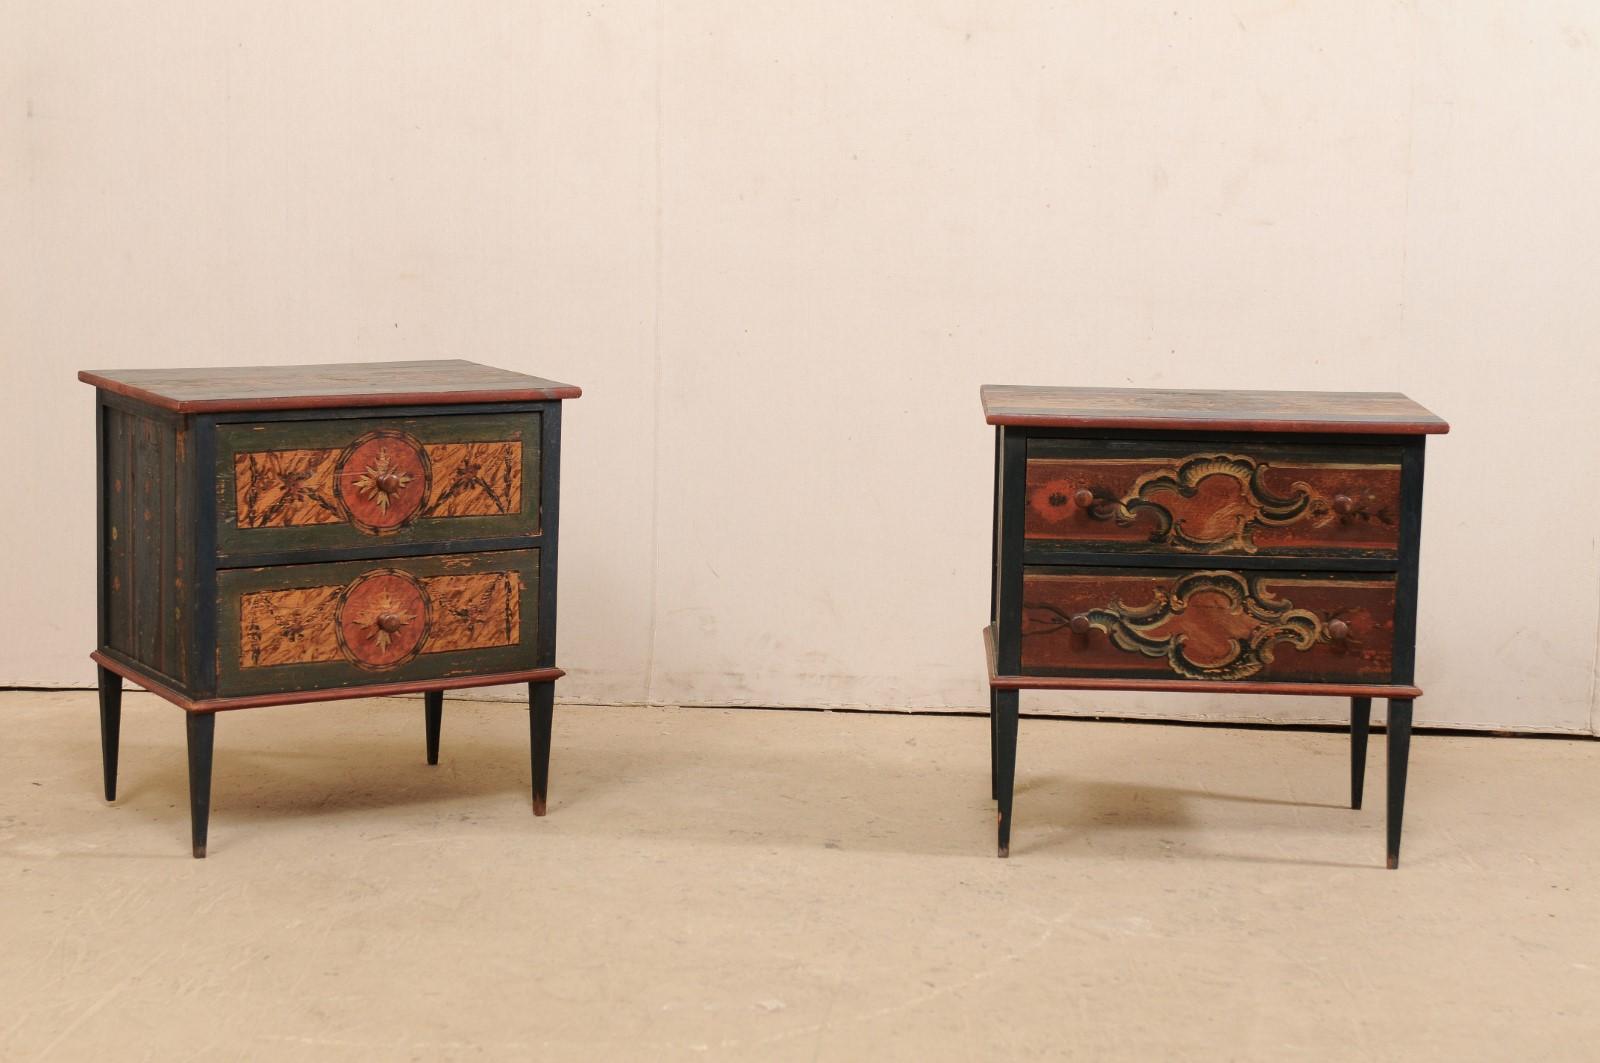 This is a delightful near-pair of Hungarian chests with their original artistic hand-paint finish from the early 20th century. This antique pair of commodes from Hungary, each featuring two dove-tailed drawers and nicely presented upon tapered